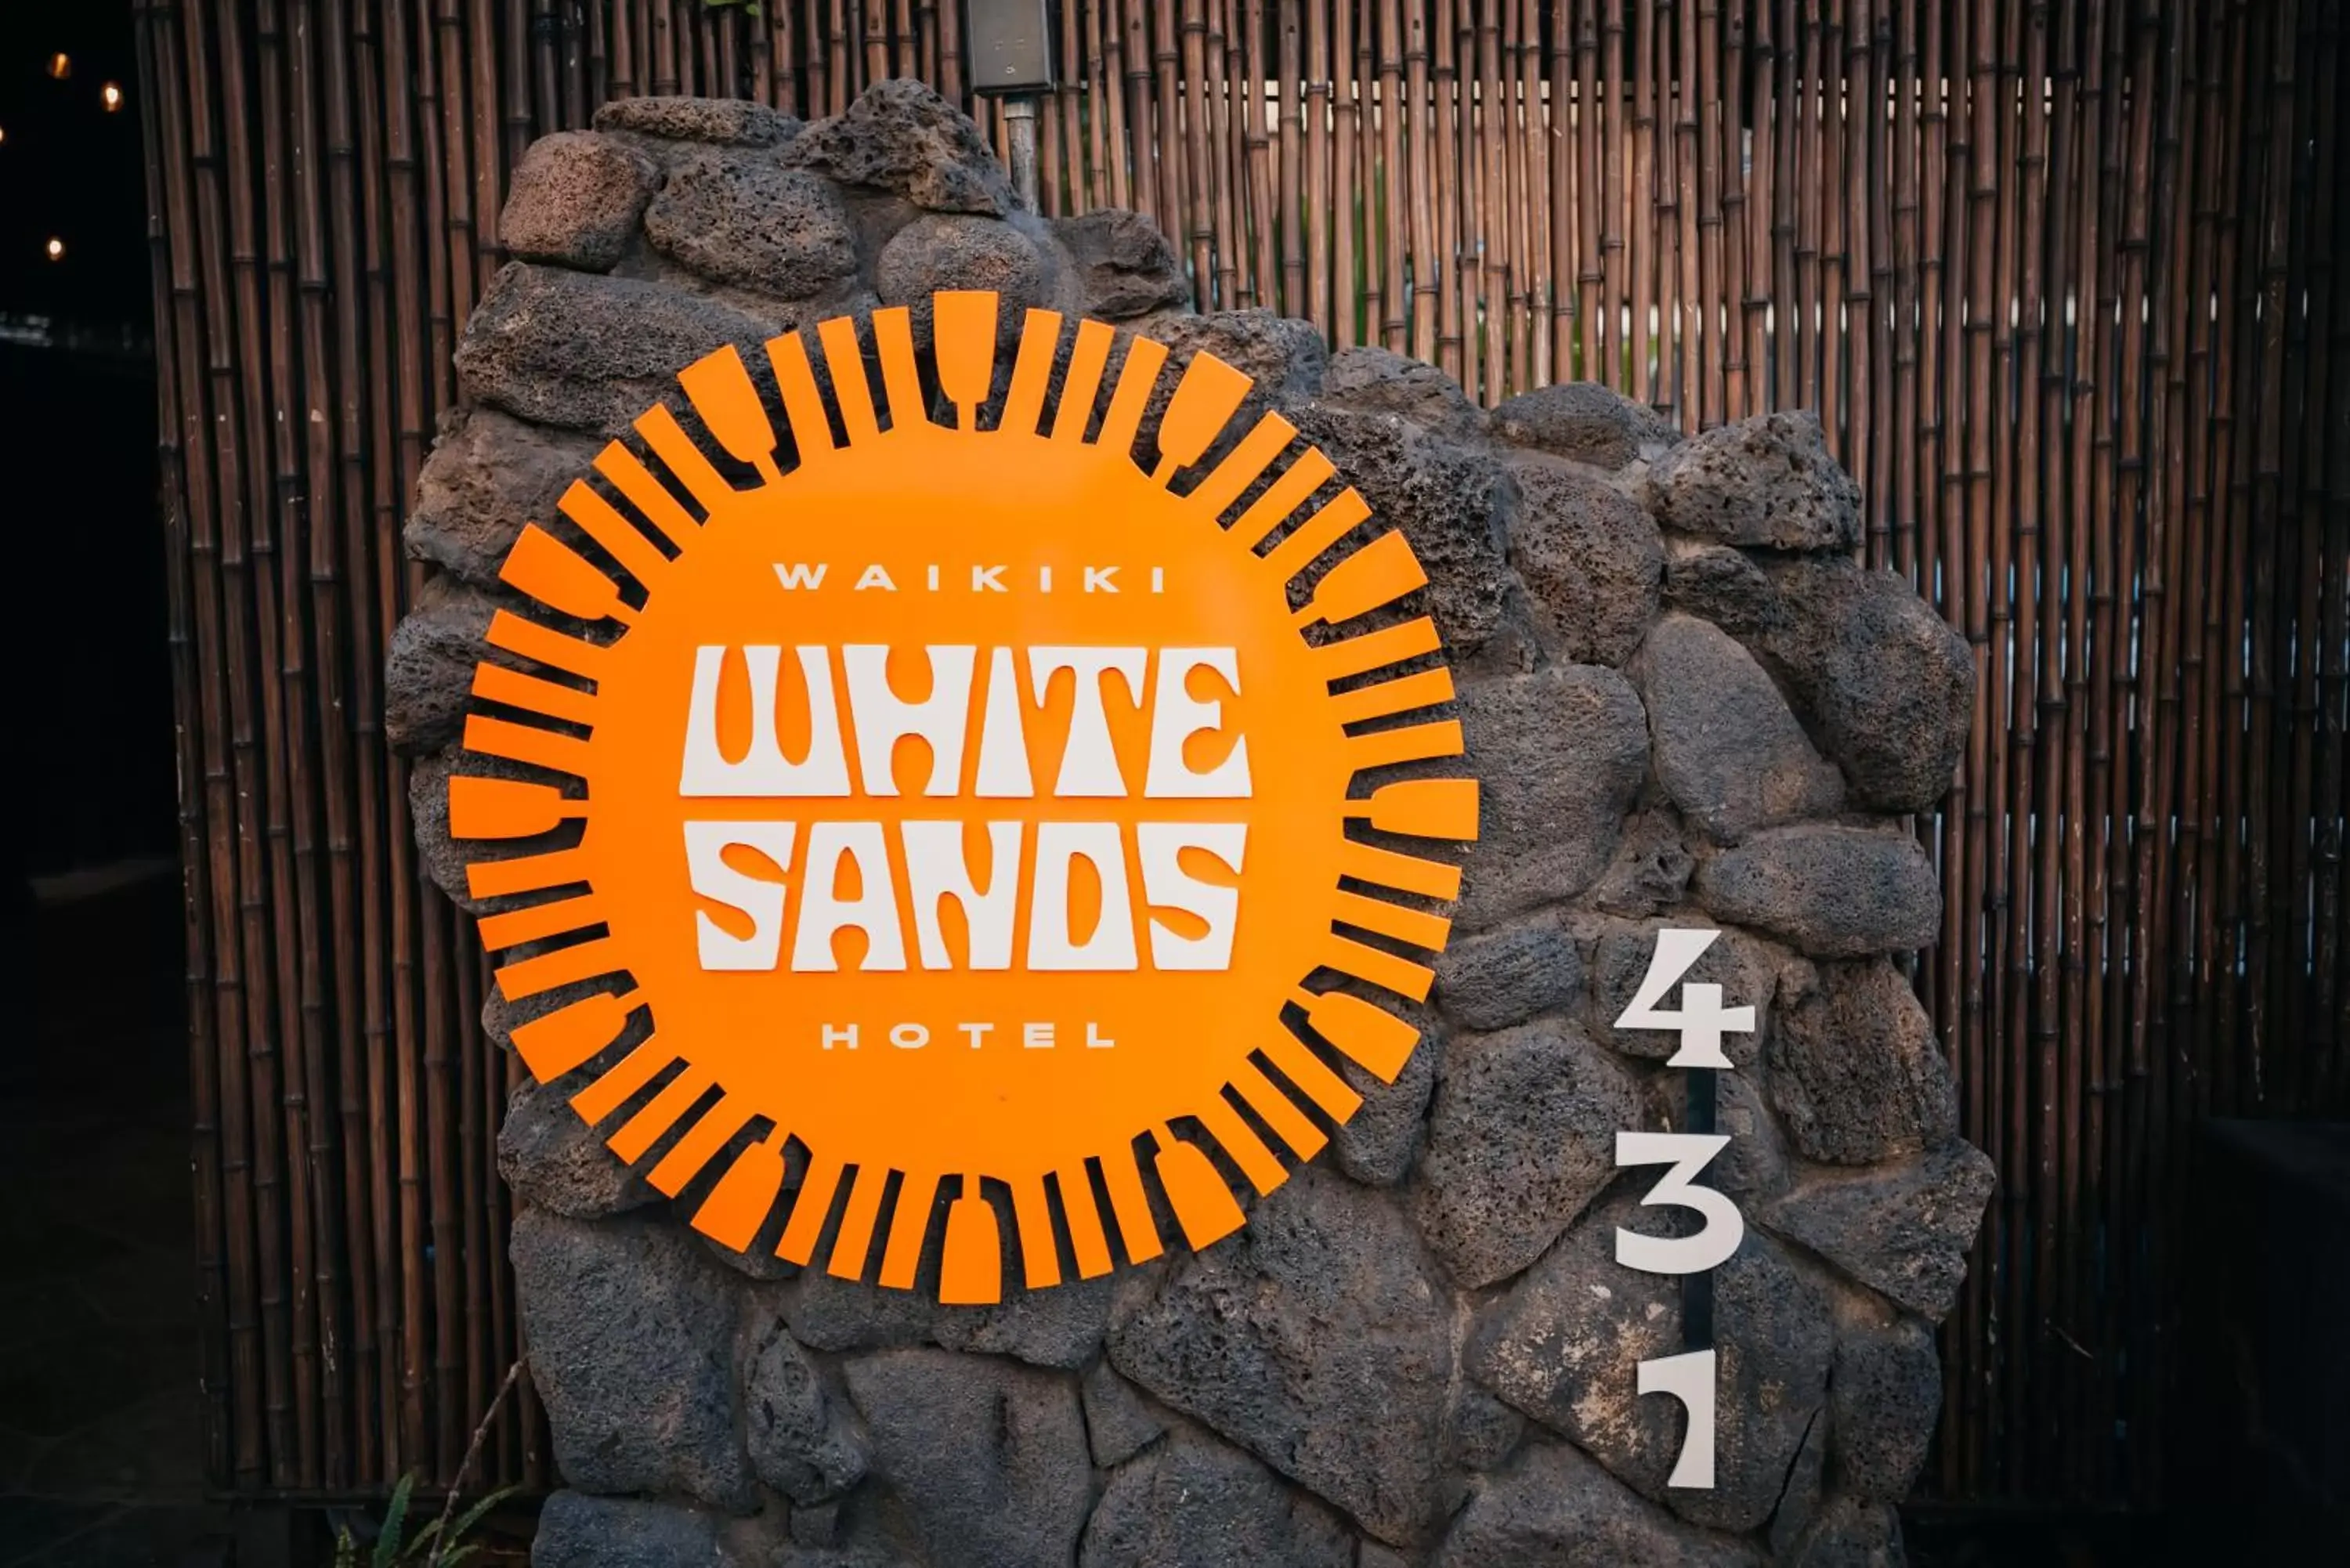 Logo/Certificate/Sign in White Sands Hotel